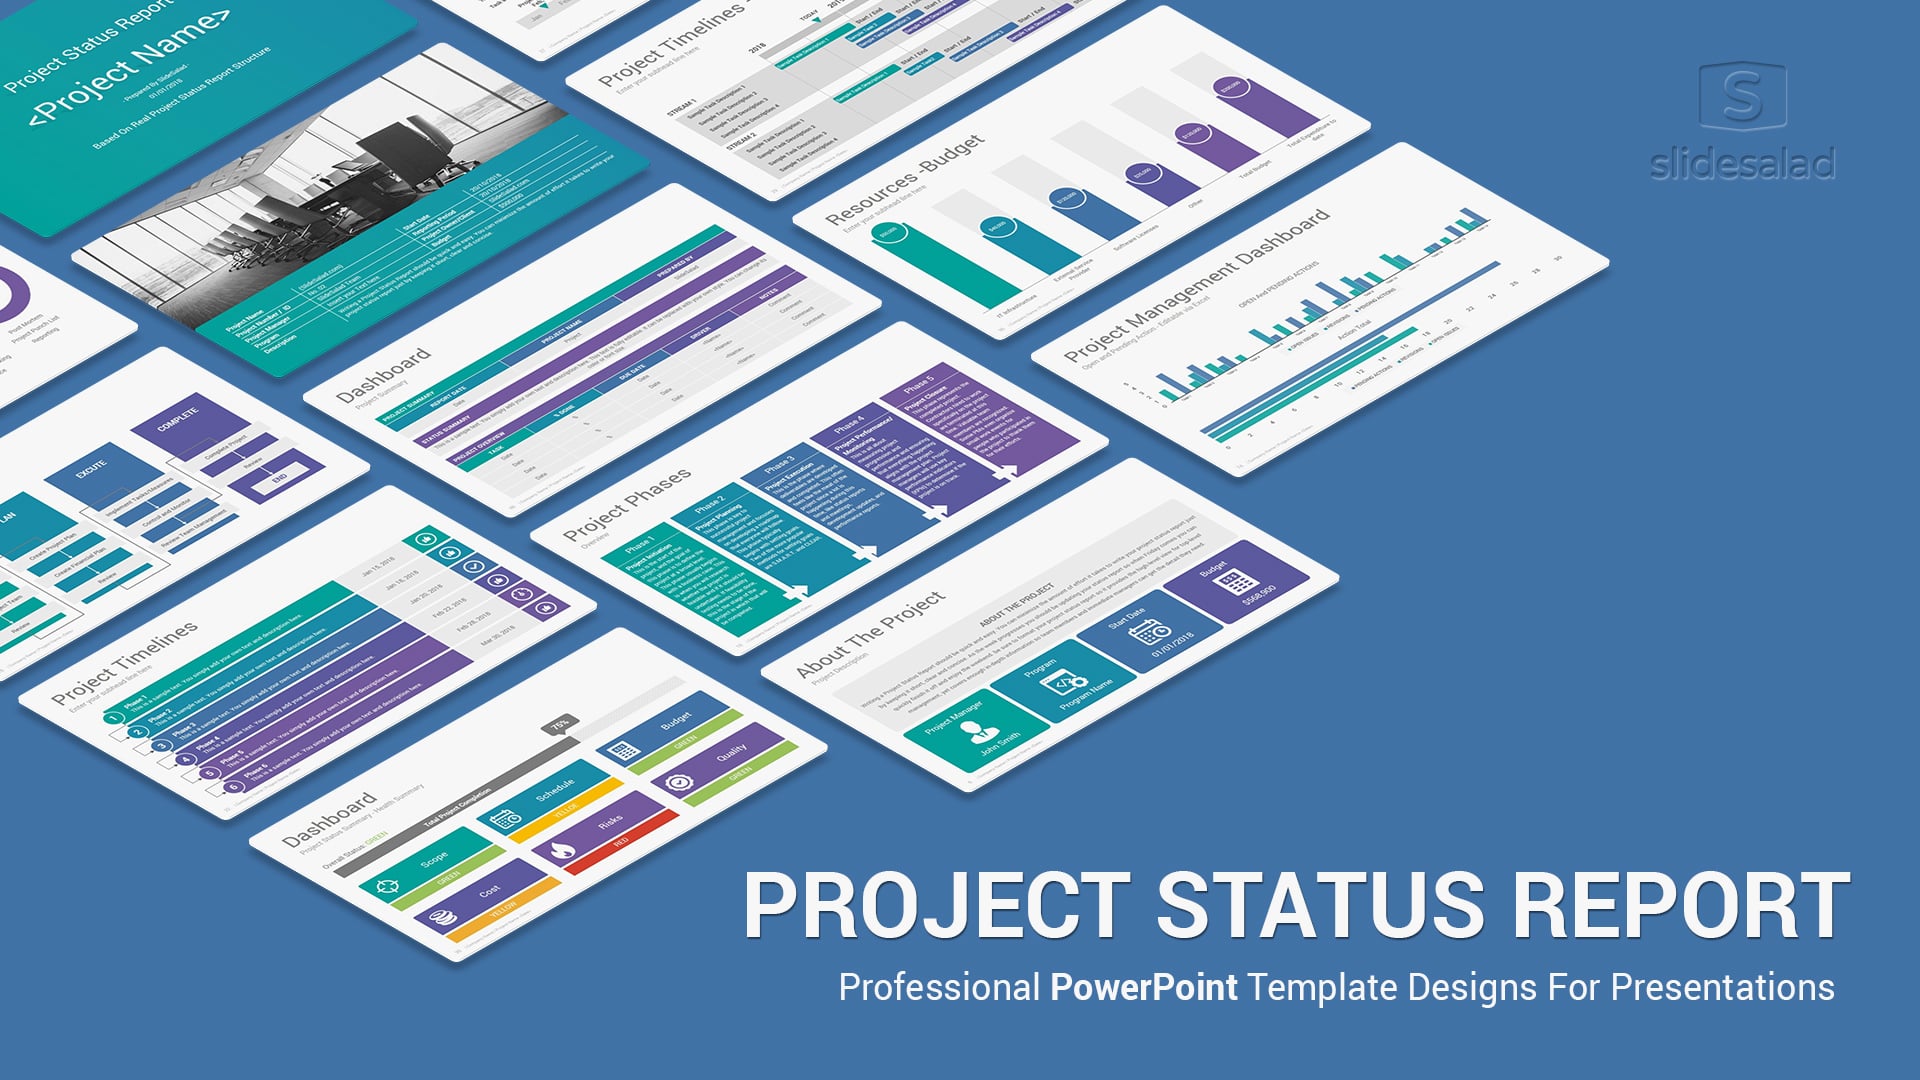 Project Status Report PowerPoint Template Design